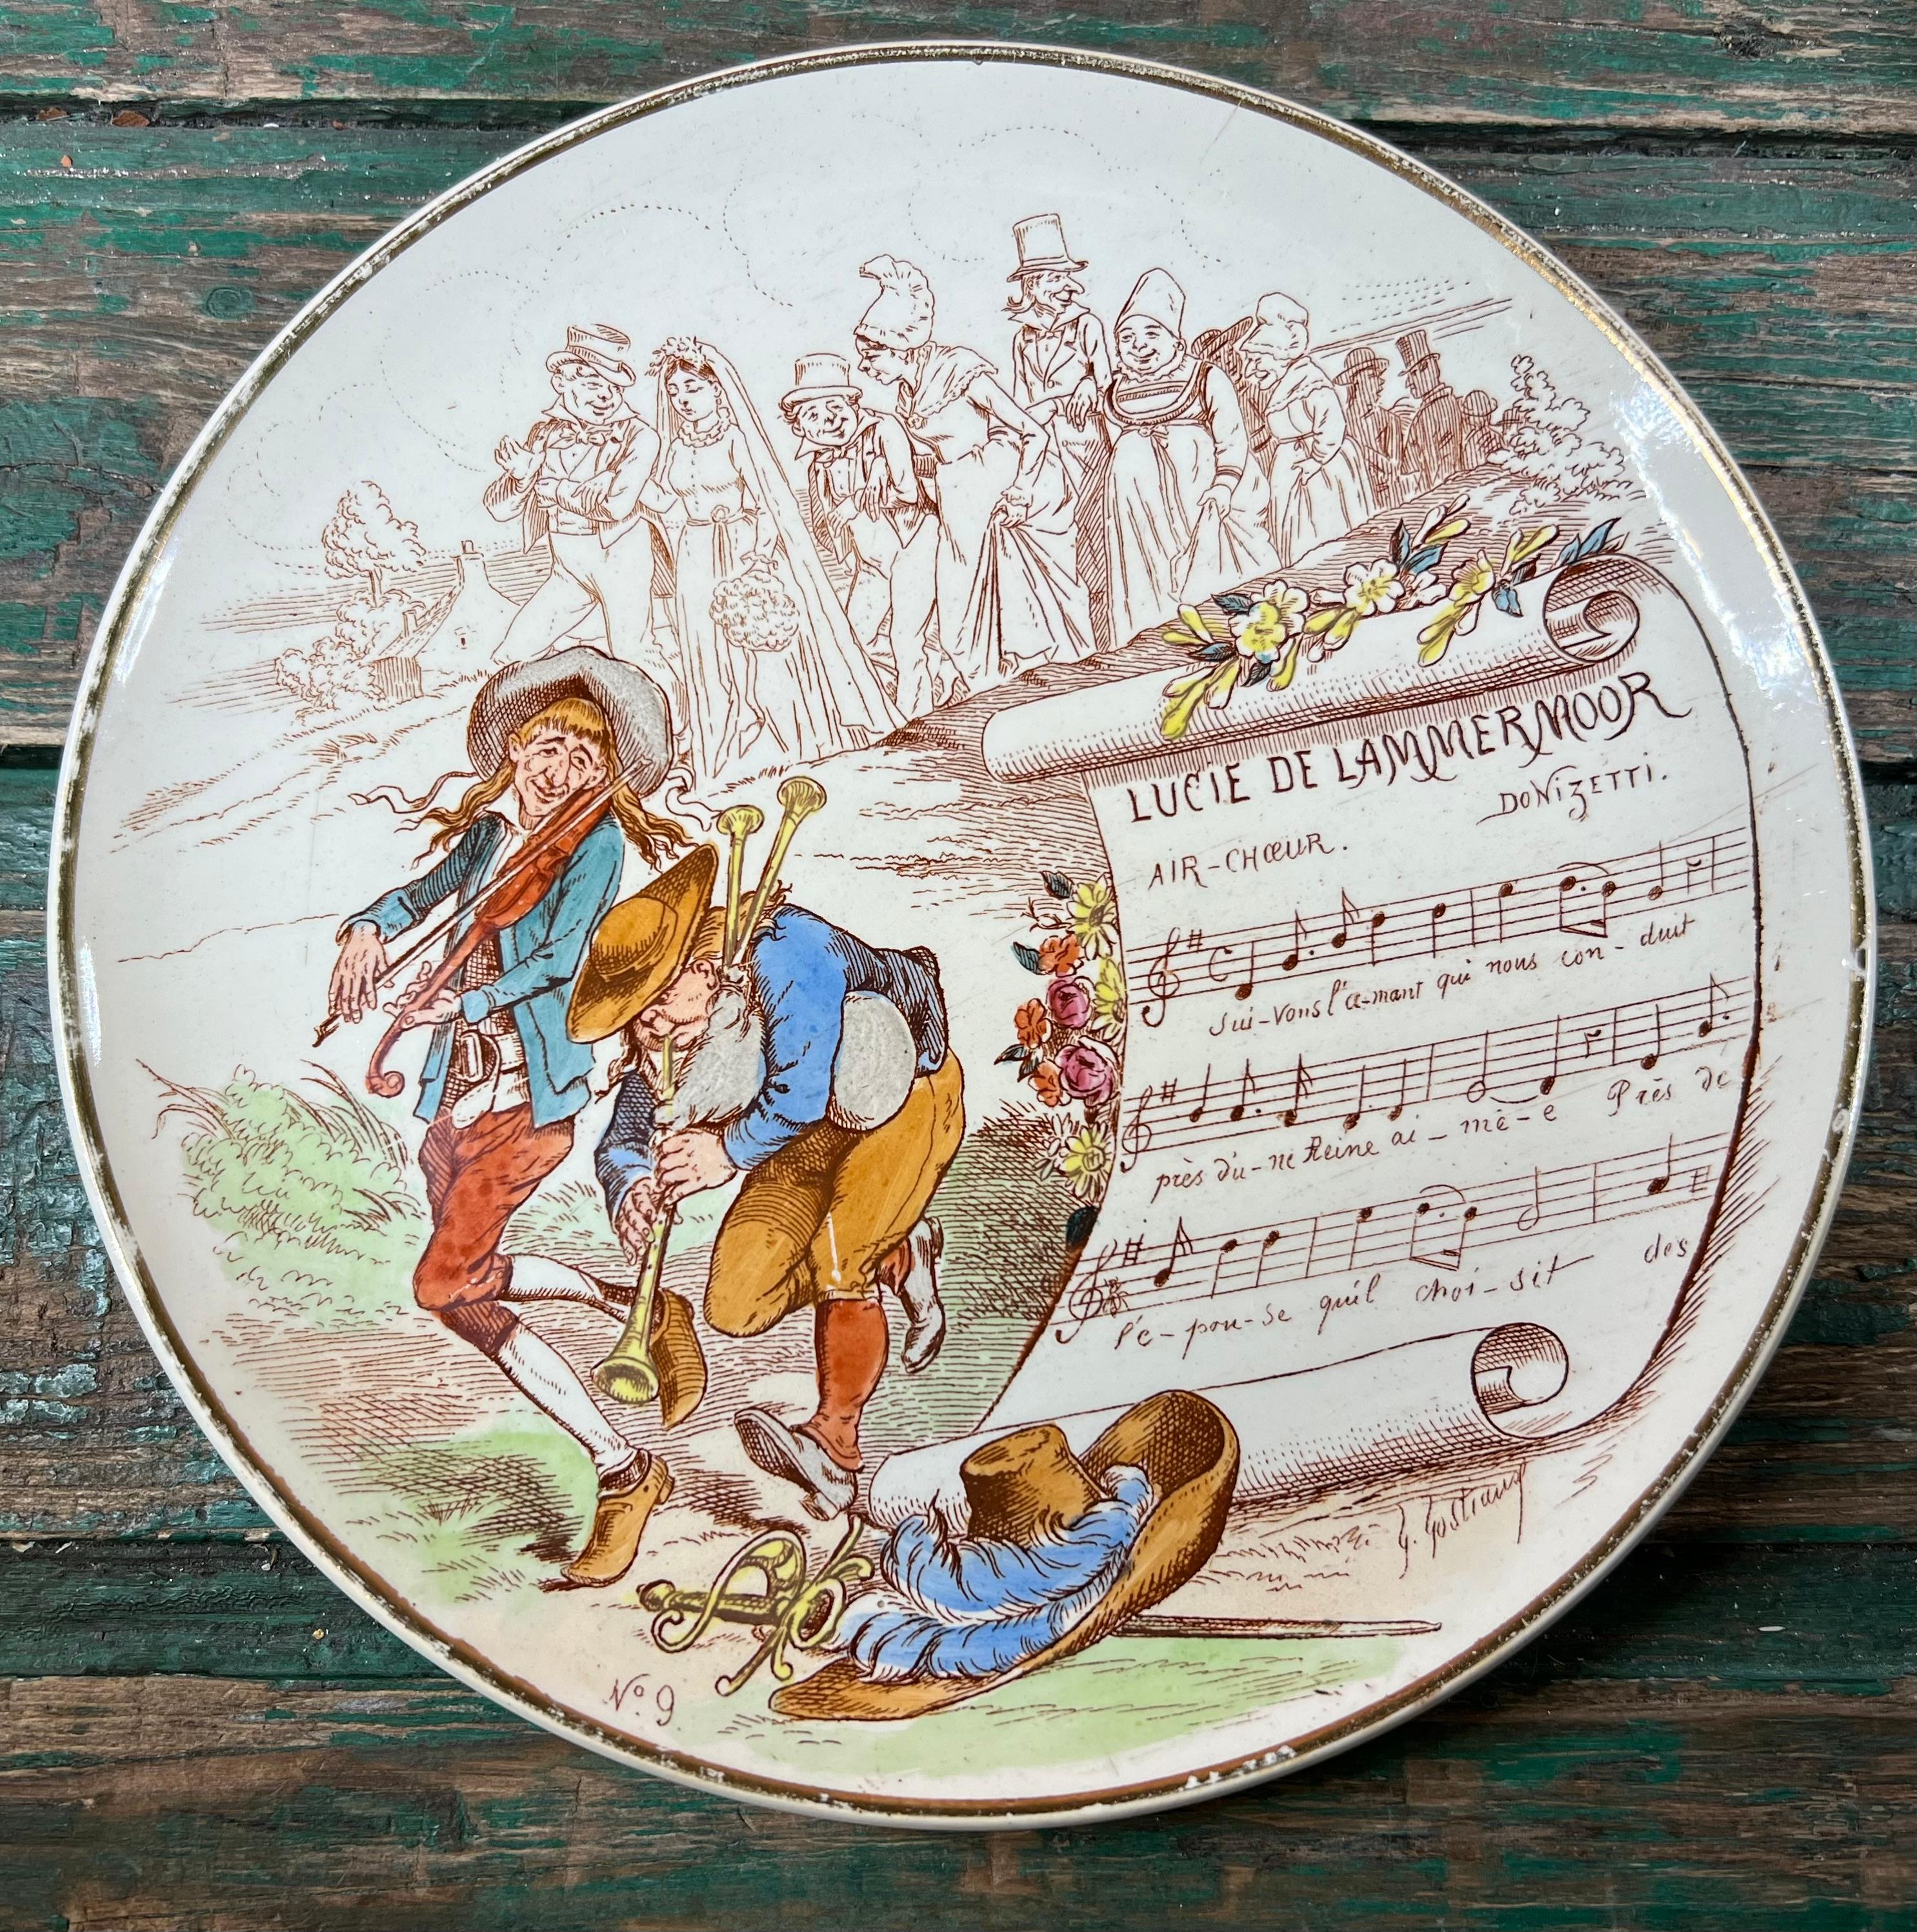 A very nice set of 3 earthenware plates from Creil-Montereau Terre de Feu, from the series of Musical Subjects, representing 3 famous operas with various characters illustrating the theme and musical scores, dating from the late 19th to early 20th